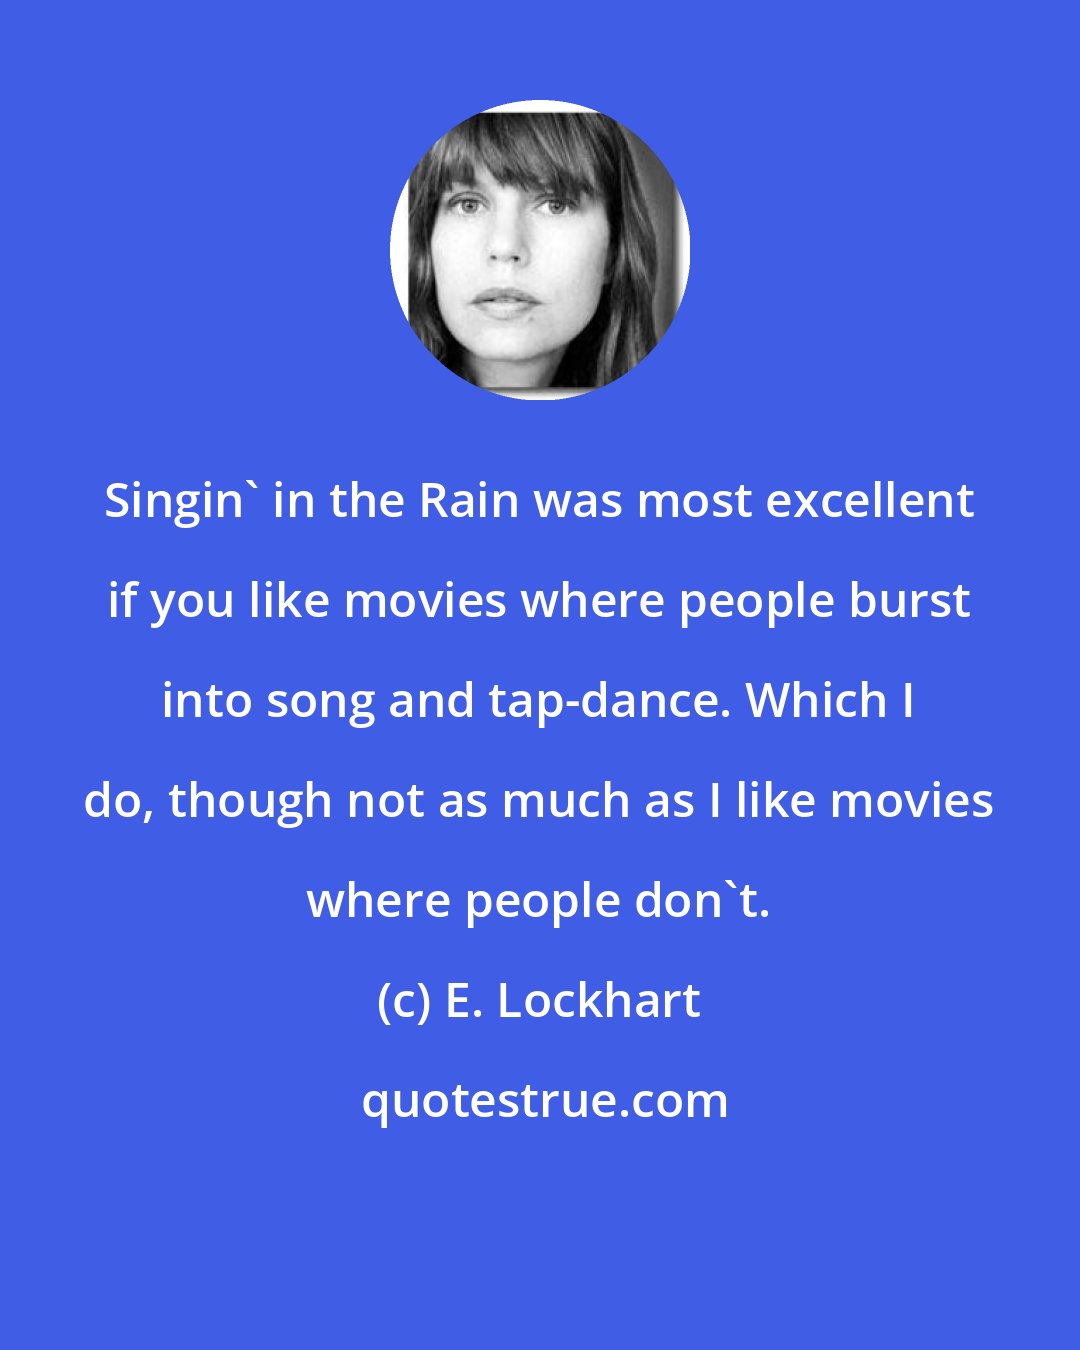 E. Lockhart: Singin' in the Rain was most excellent if you like movies where people burst into song and tap-dance. Which I do, though not as much as I like movies where people don't.